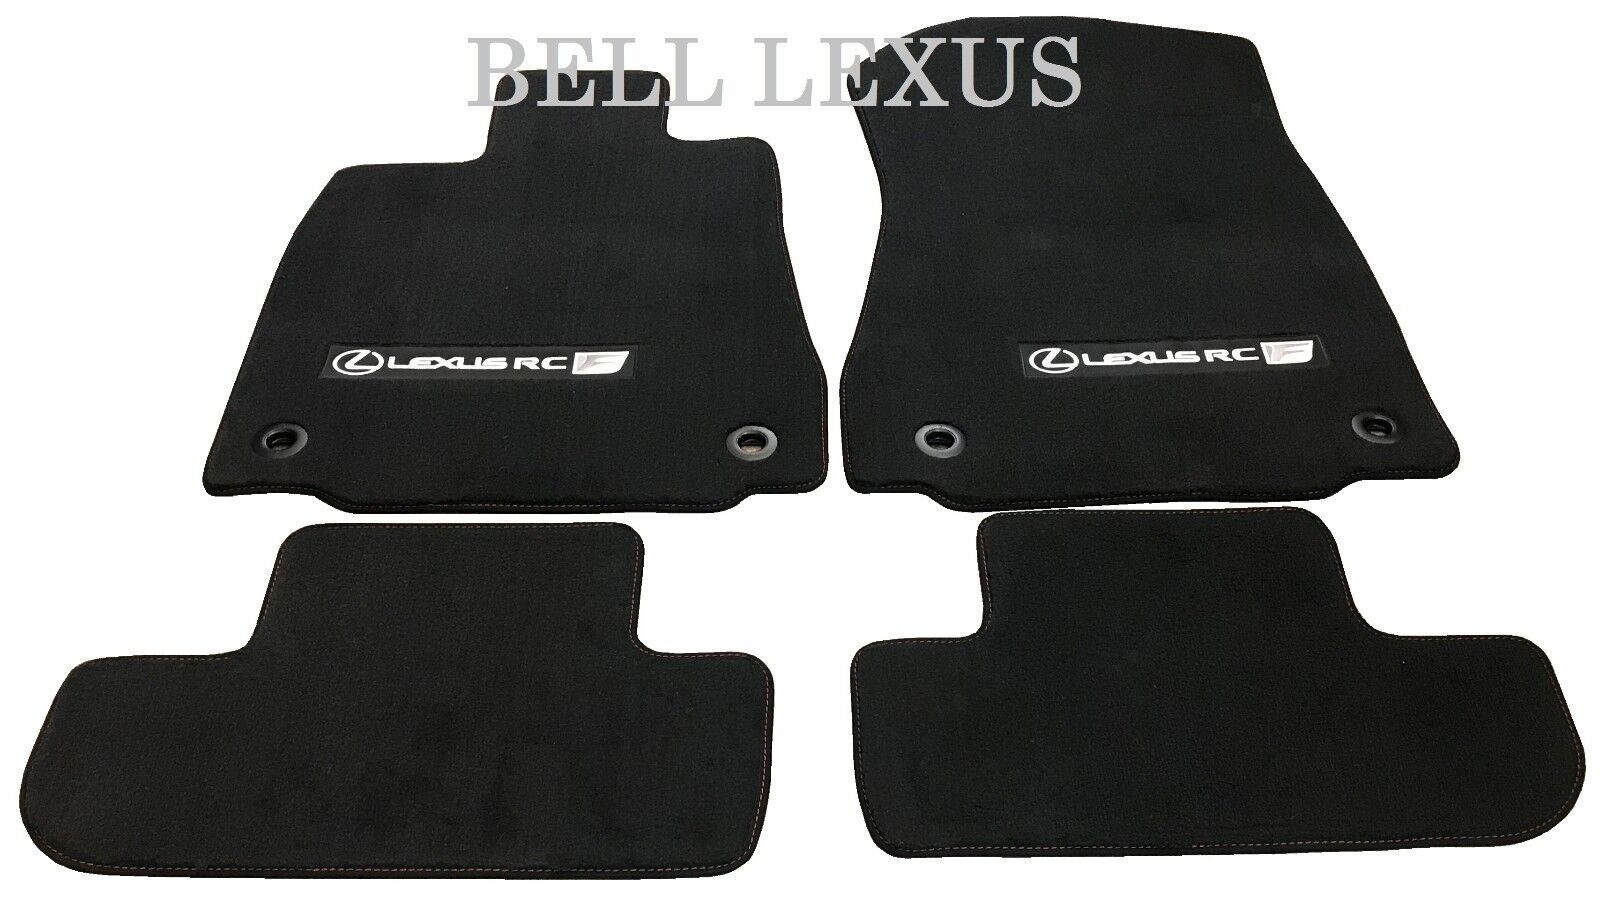 NEW LEXUS OEM FACTORY FLOOR MAT SET 2015-2019 RC-F RWD BLACK WITH RED STITCHING